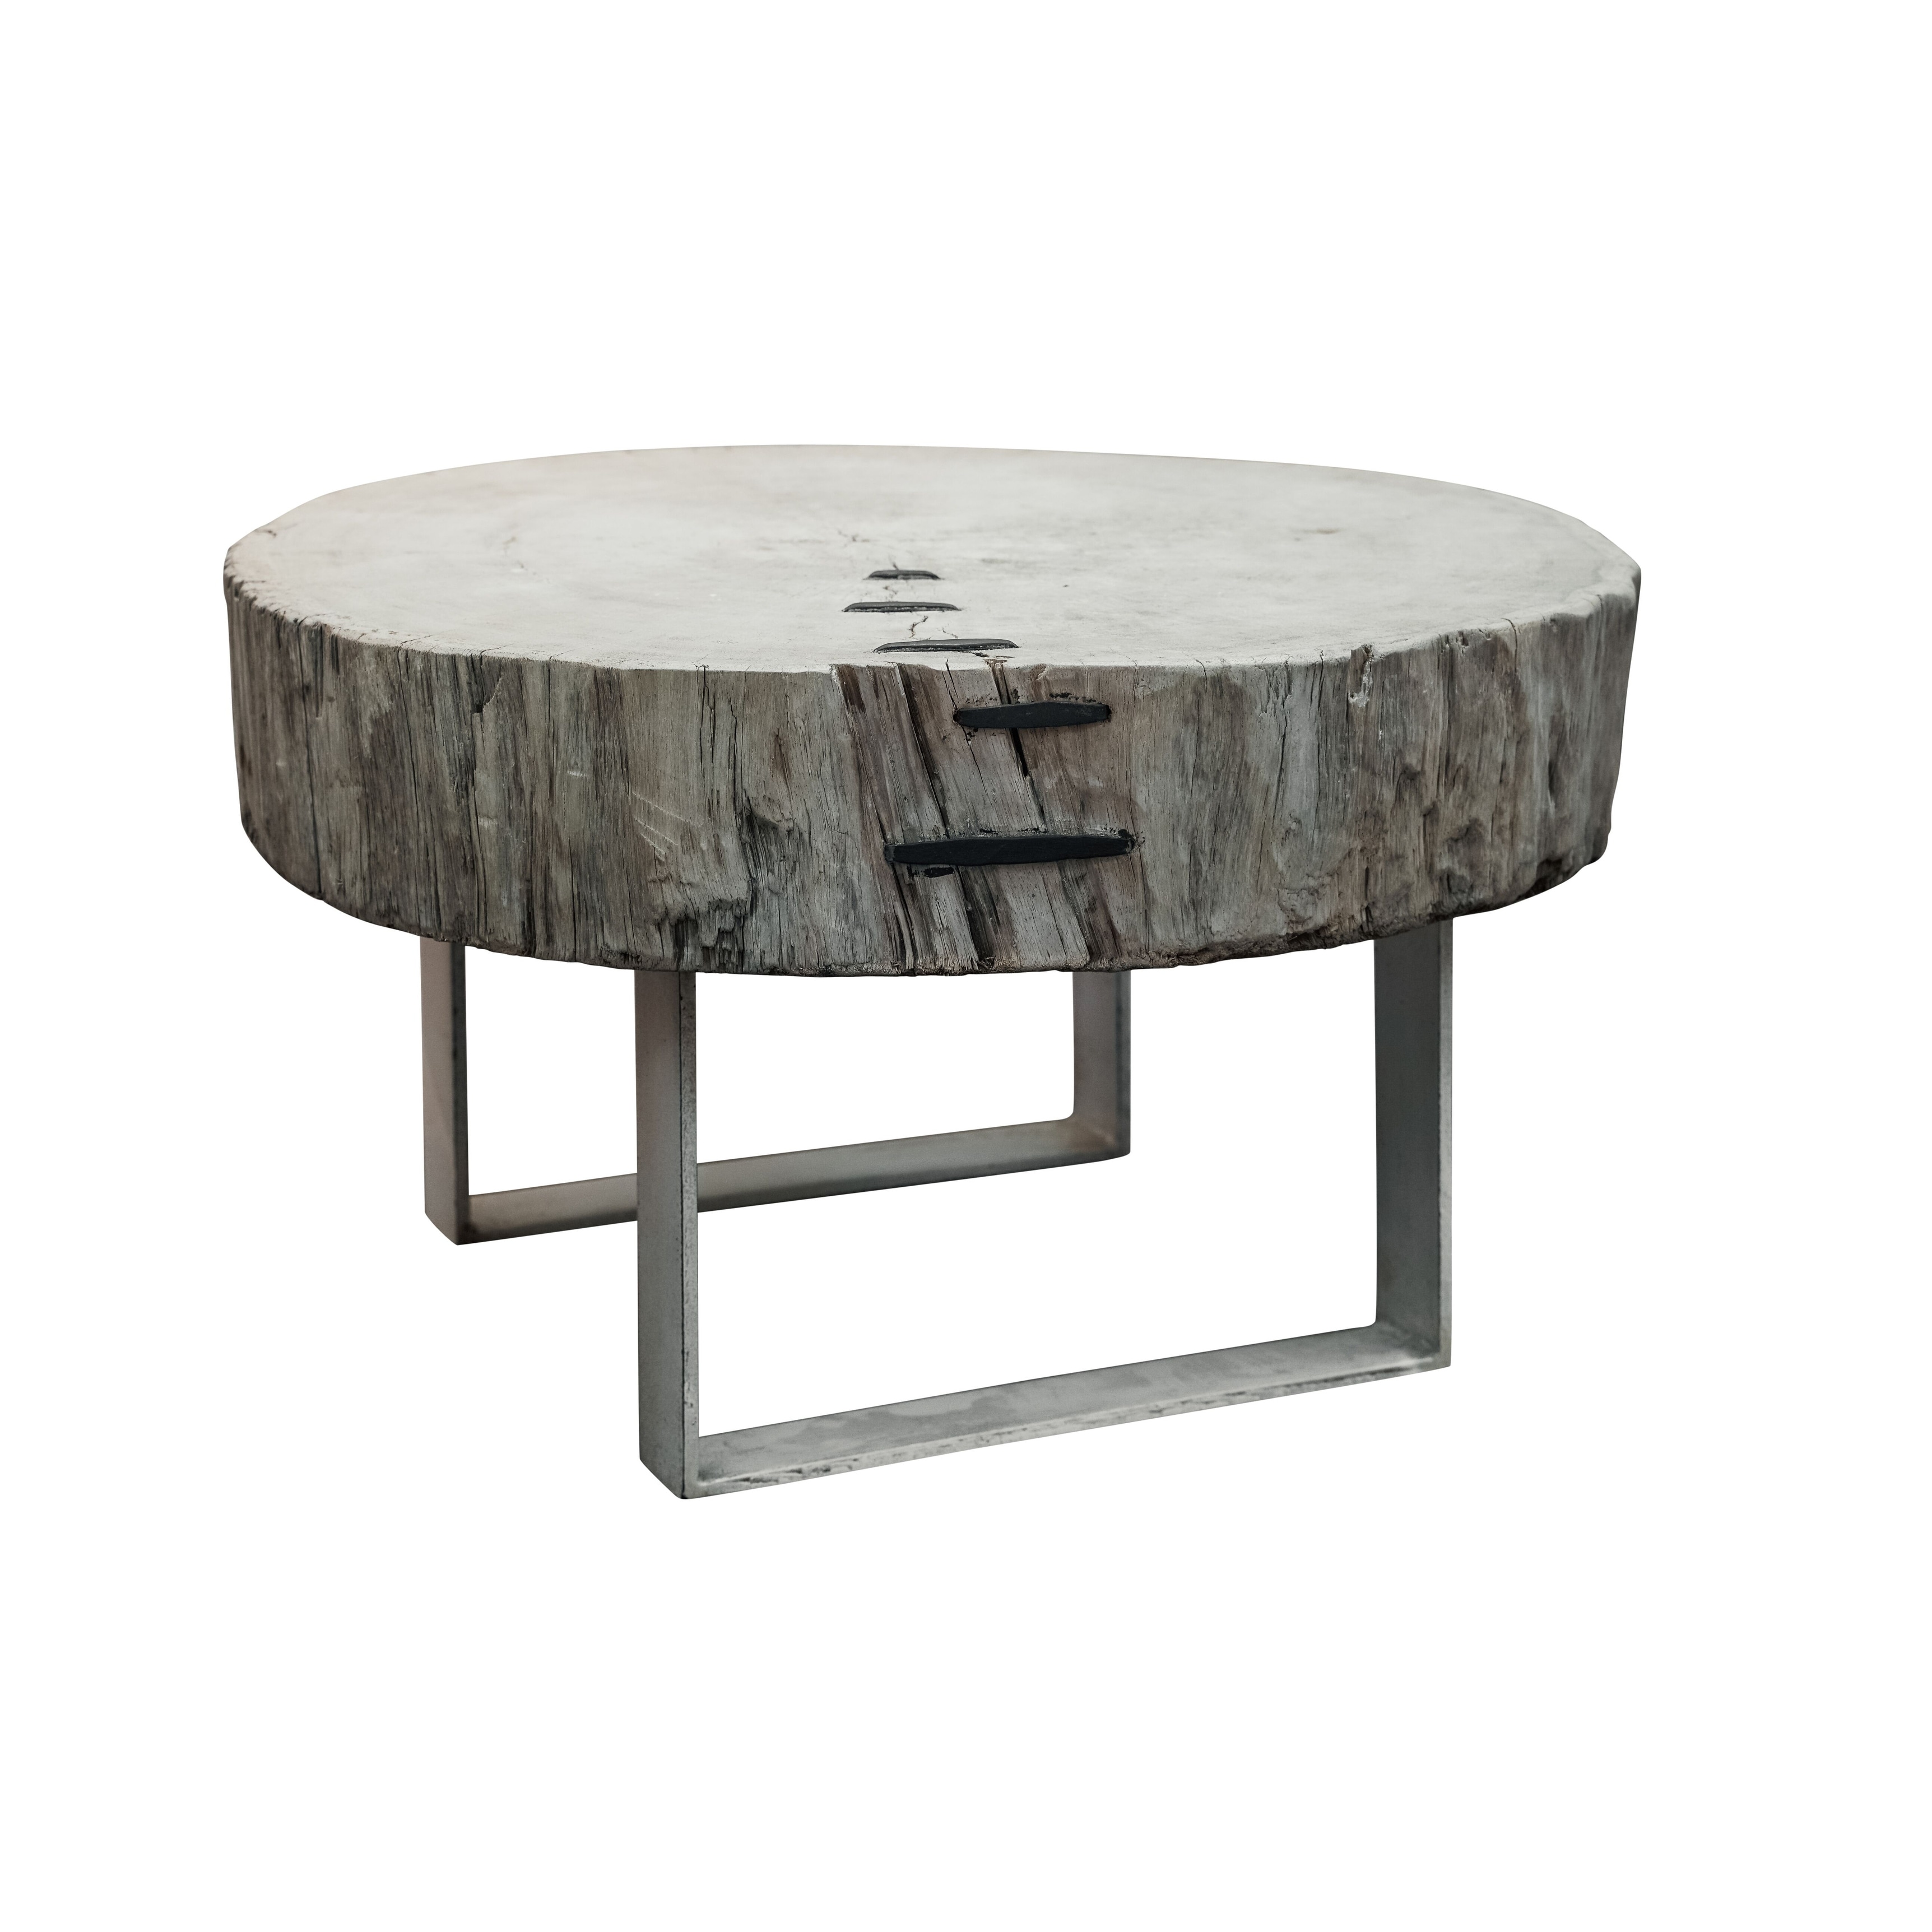 Corabelle Sundial Natural Wood Glass Coffee Table